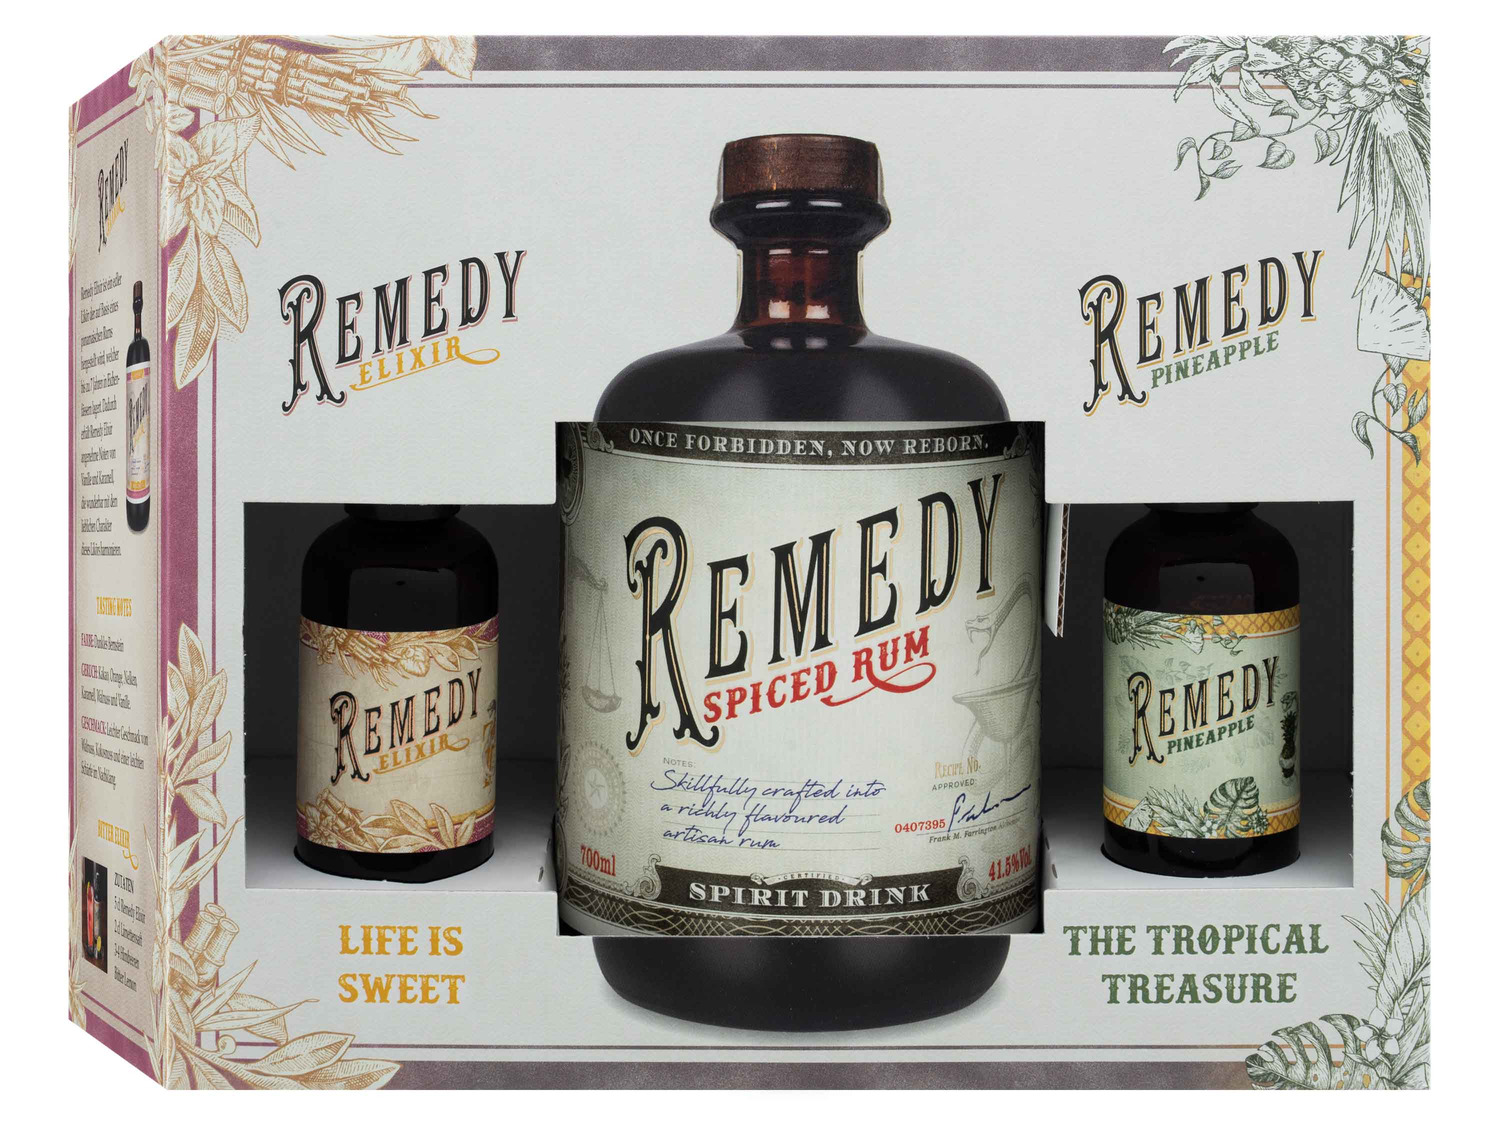 Remedy Spiced Rum 41,5% Pineapple 40%… 5cl Vol + Remedy